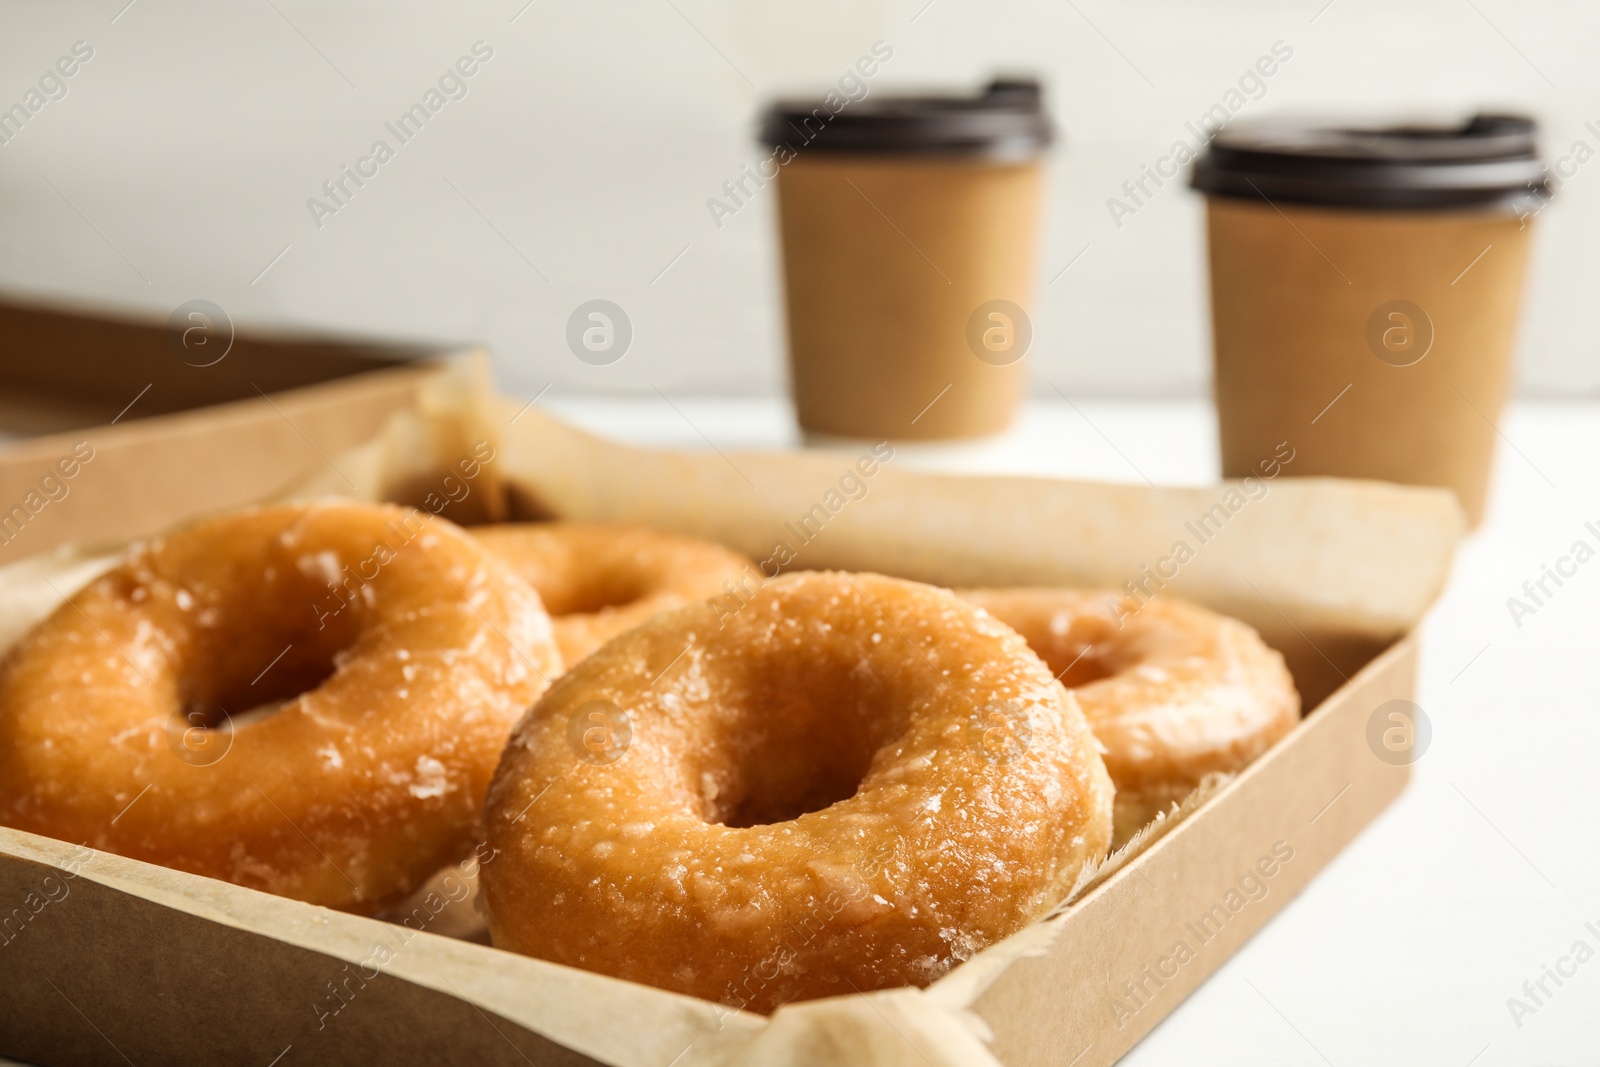 Photo of Delicious donuts in box on white table